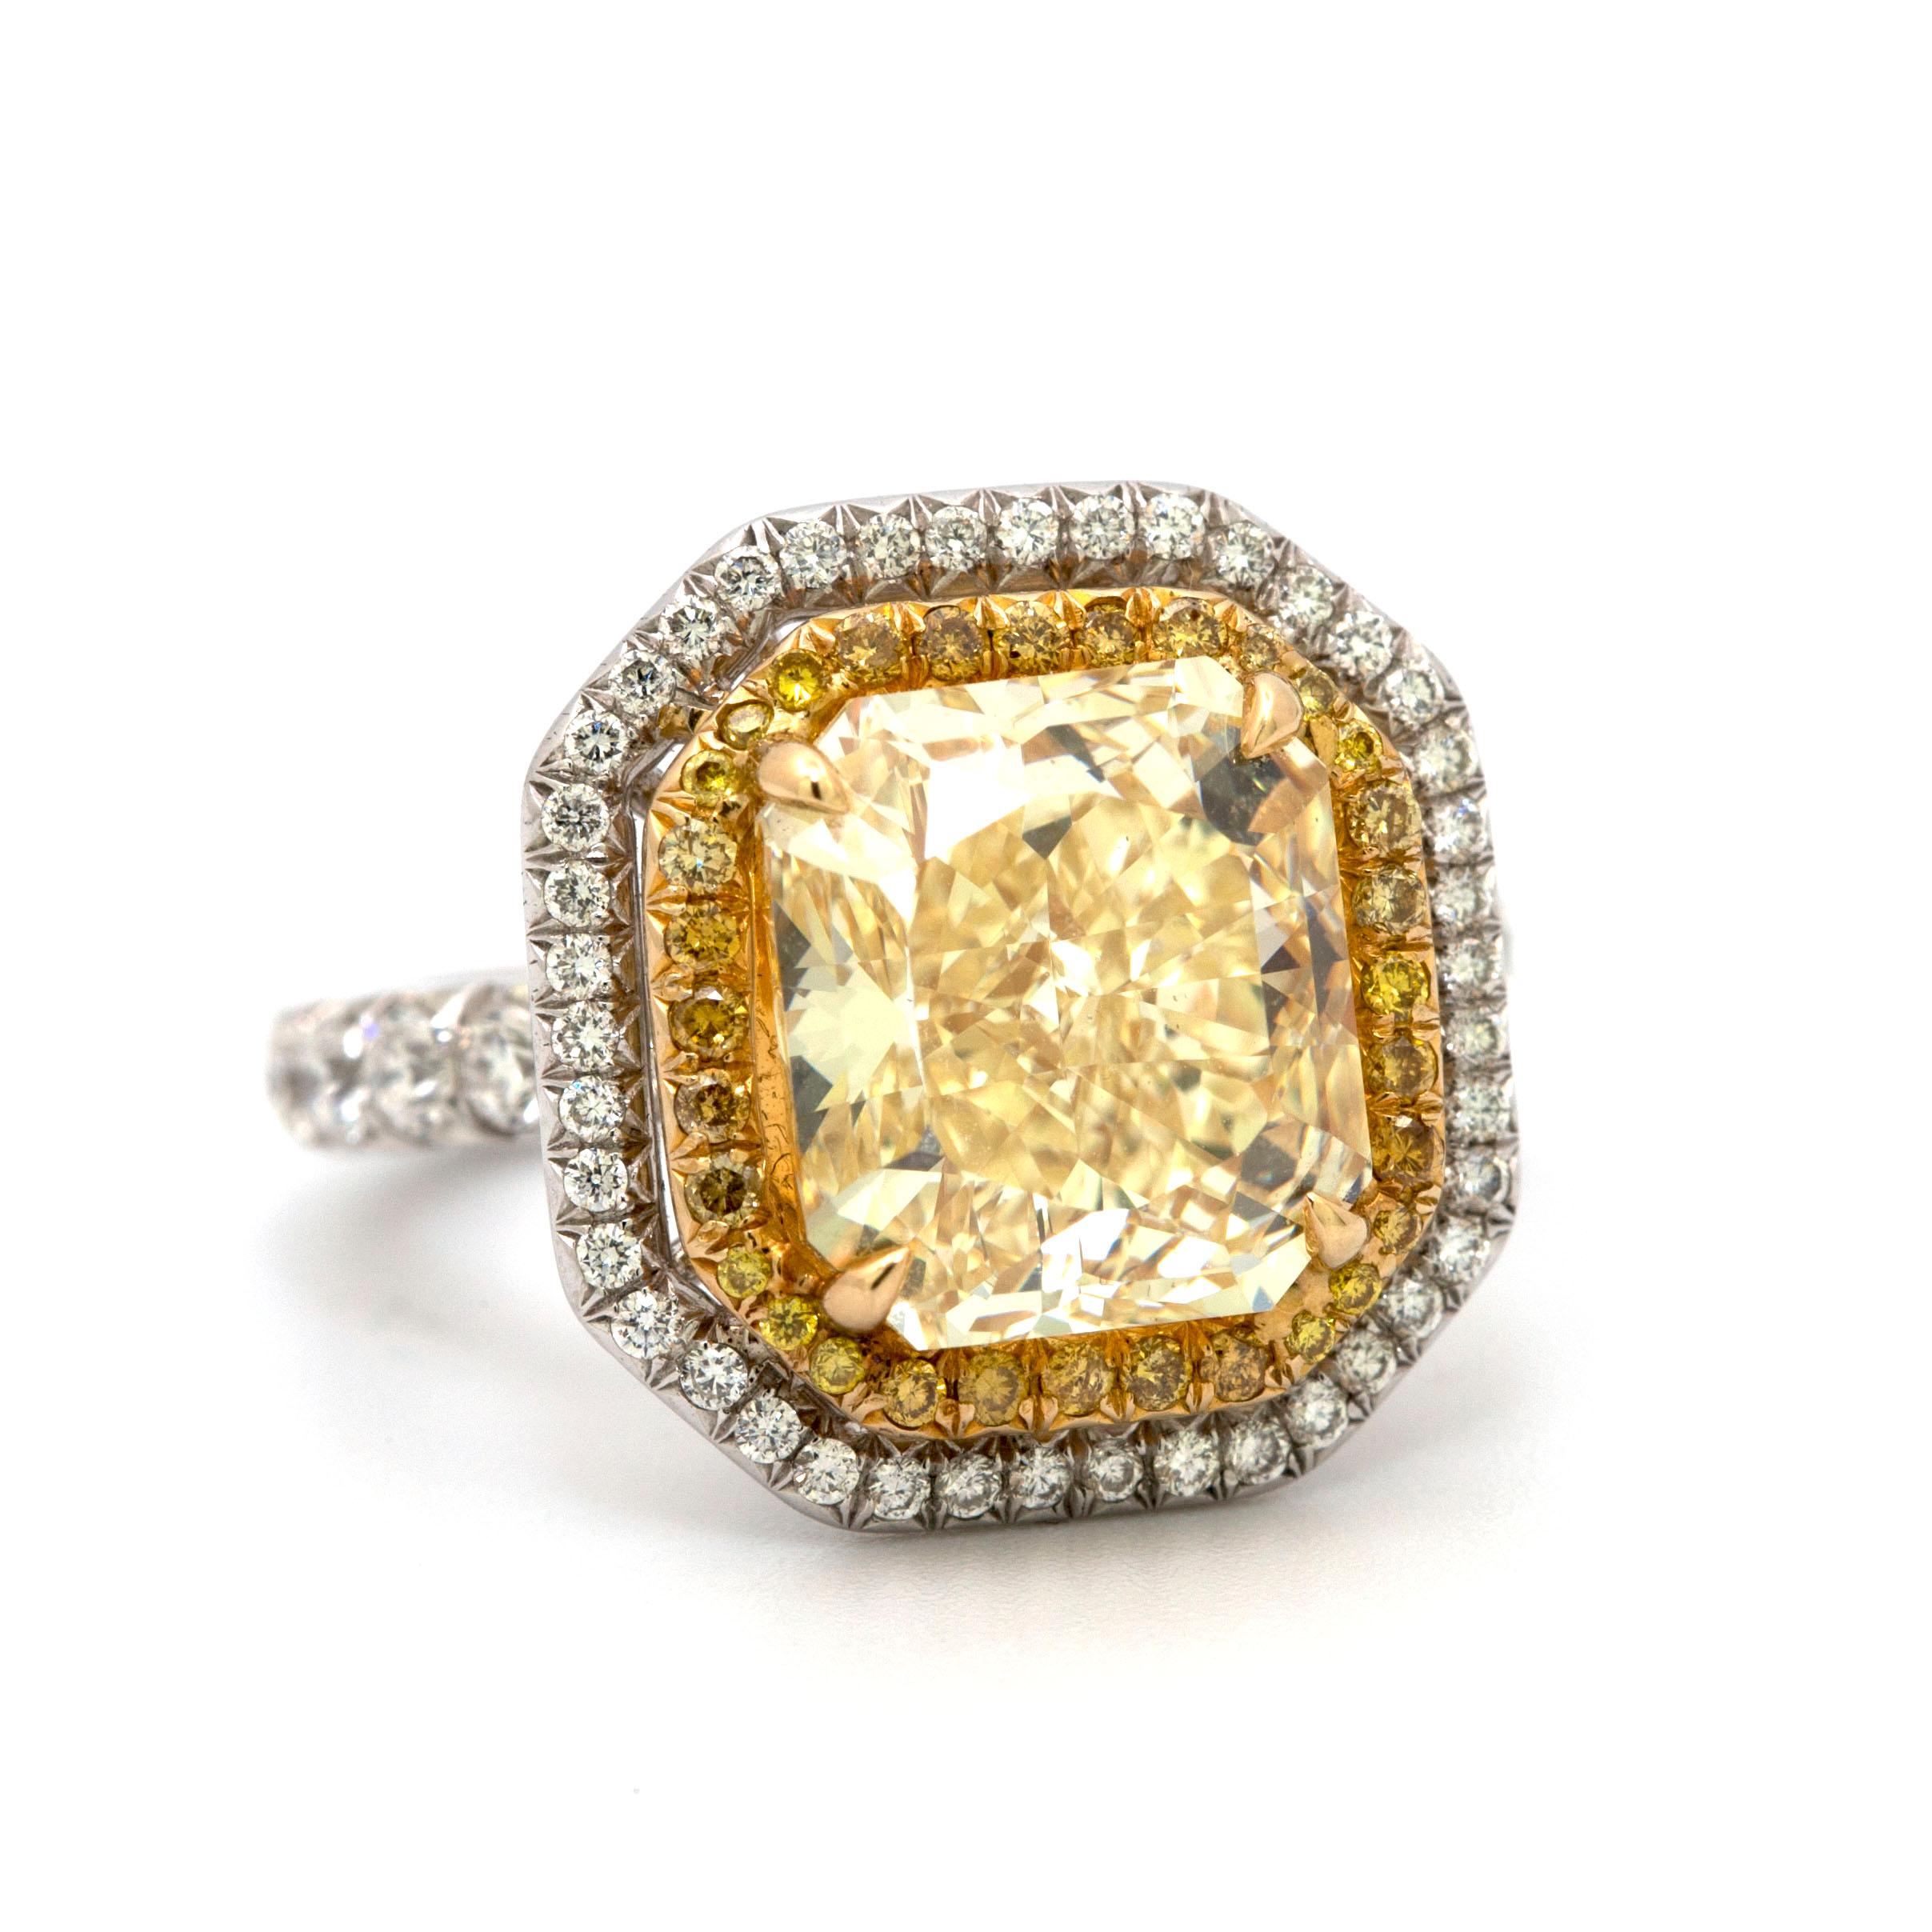 This beautiful ring showcases a canter diamond of 5.26 carats accompanied by a GIA diamond grading report #1172126790, indicating a grading of Fancy Yellow color and VS2 clarity,

Set in platinum & 18 karat gold ring with one row of yellow round